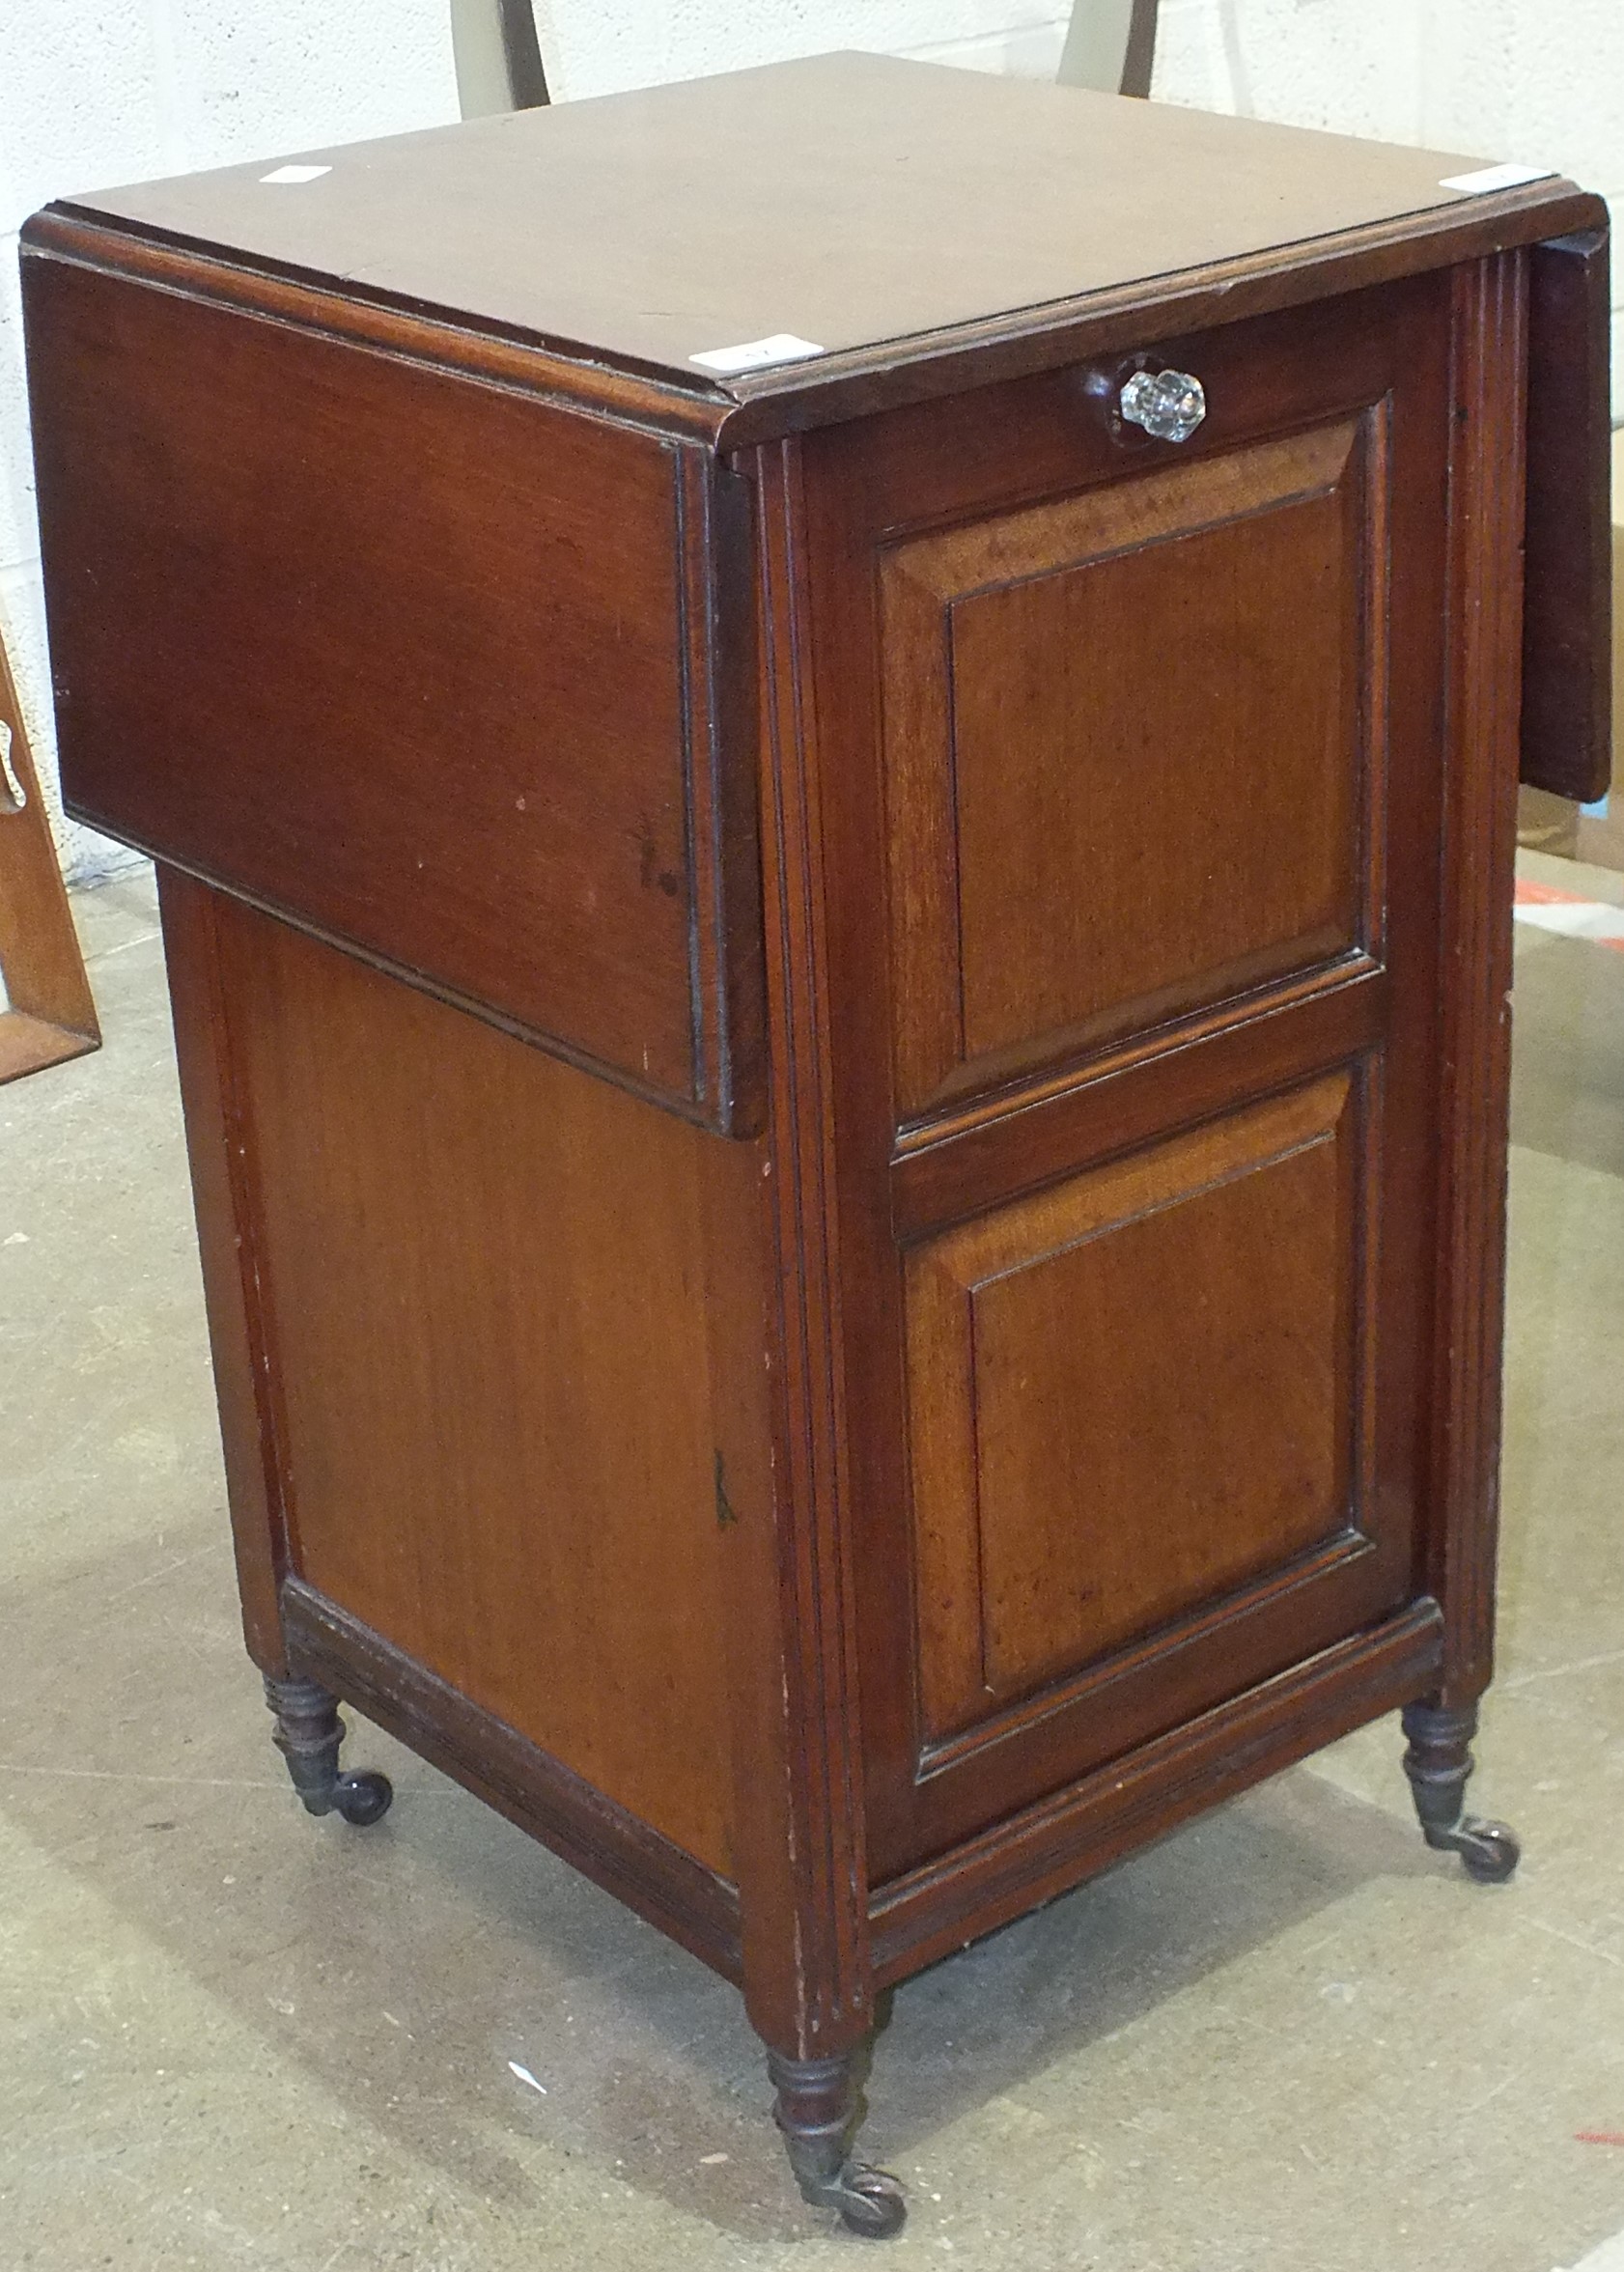 A mahogany coal purdonium with panelled door, wicker lining basket and the top with folding